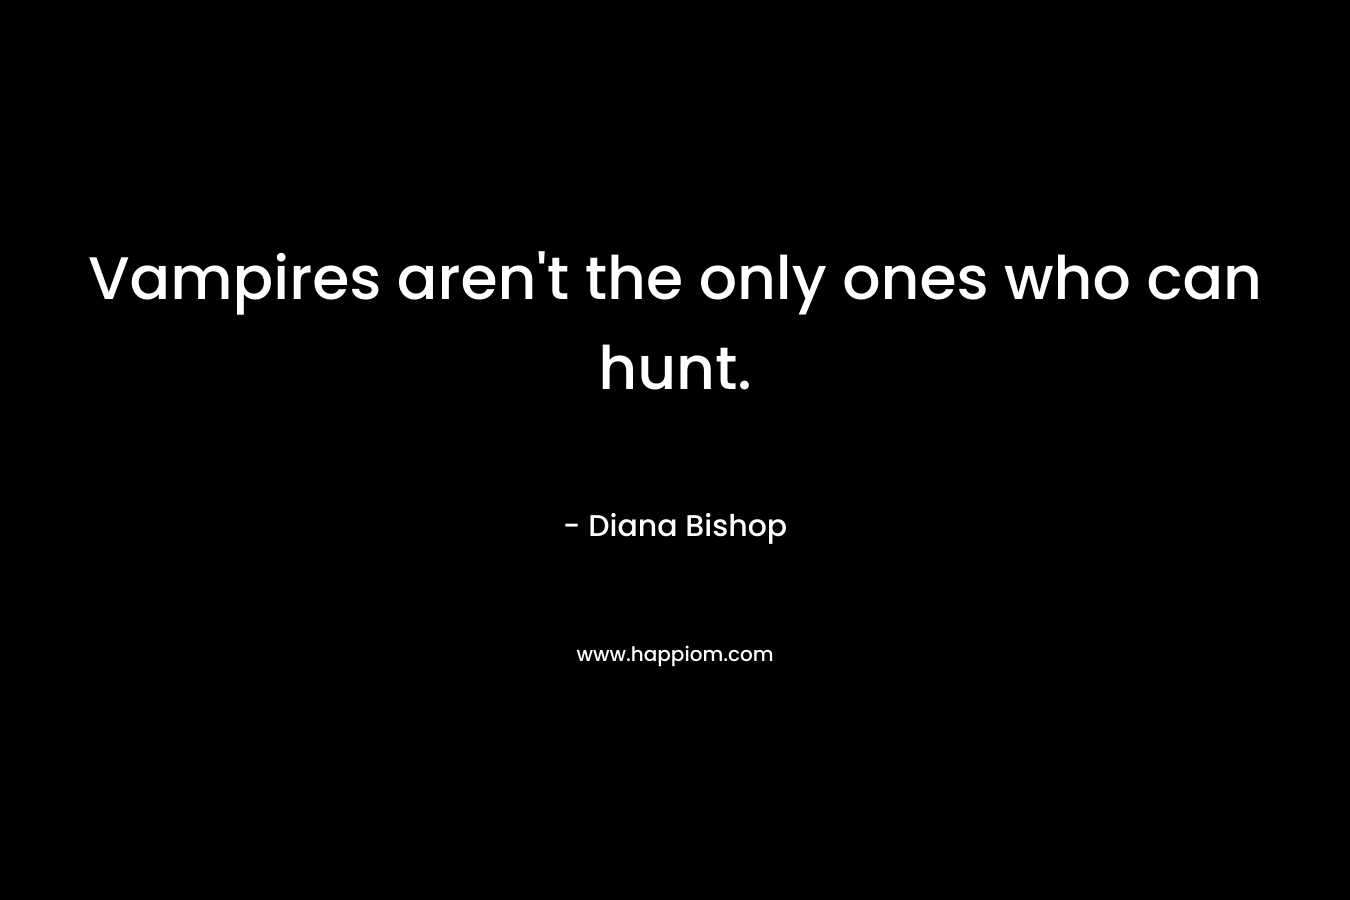 Vampires aren’t the only ones who can hunt. – Diana Bishop